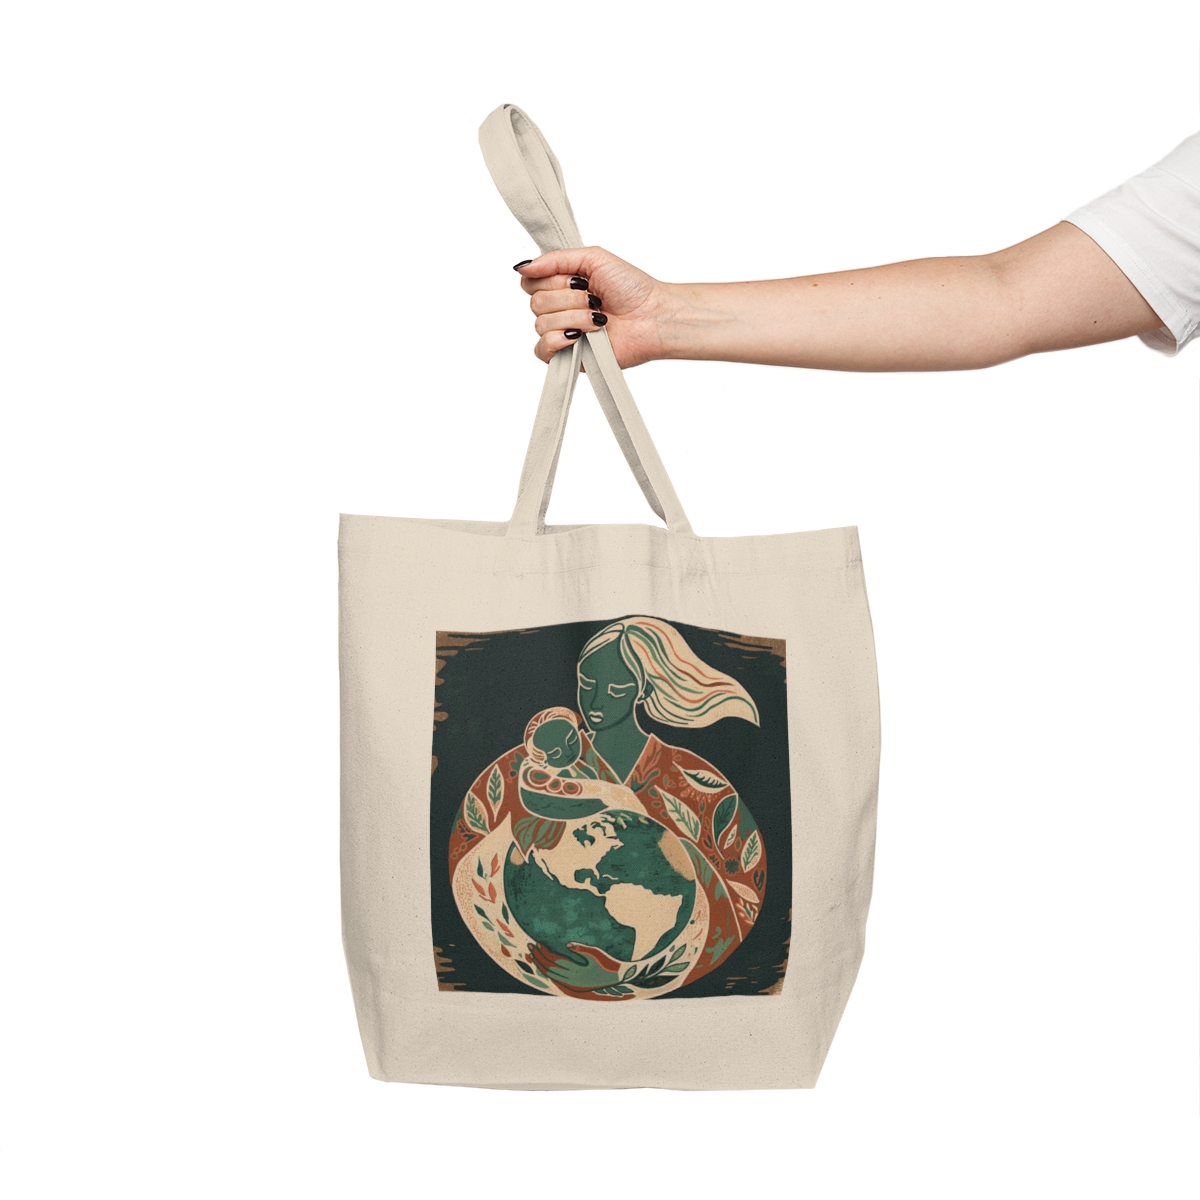 **Mid Tier** Limited Edition Wombs of the World + Olivia Jane Art Canvas Shopping Tote product thumbnail image